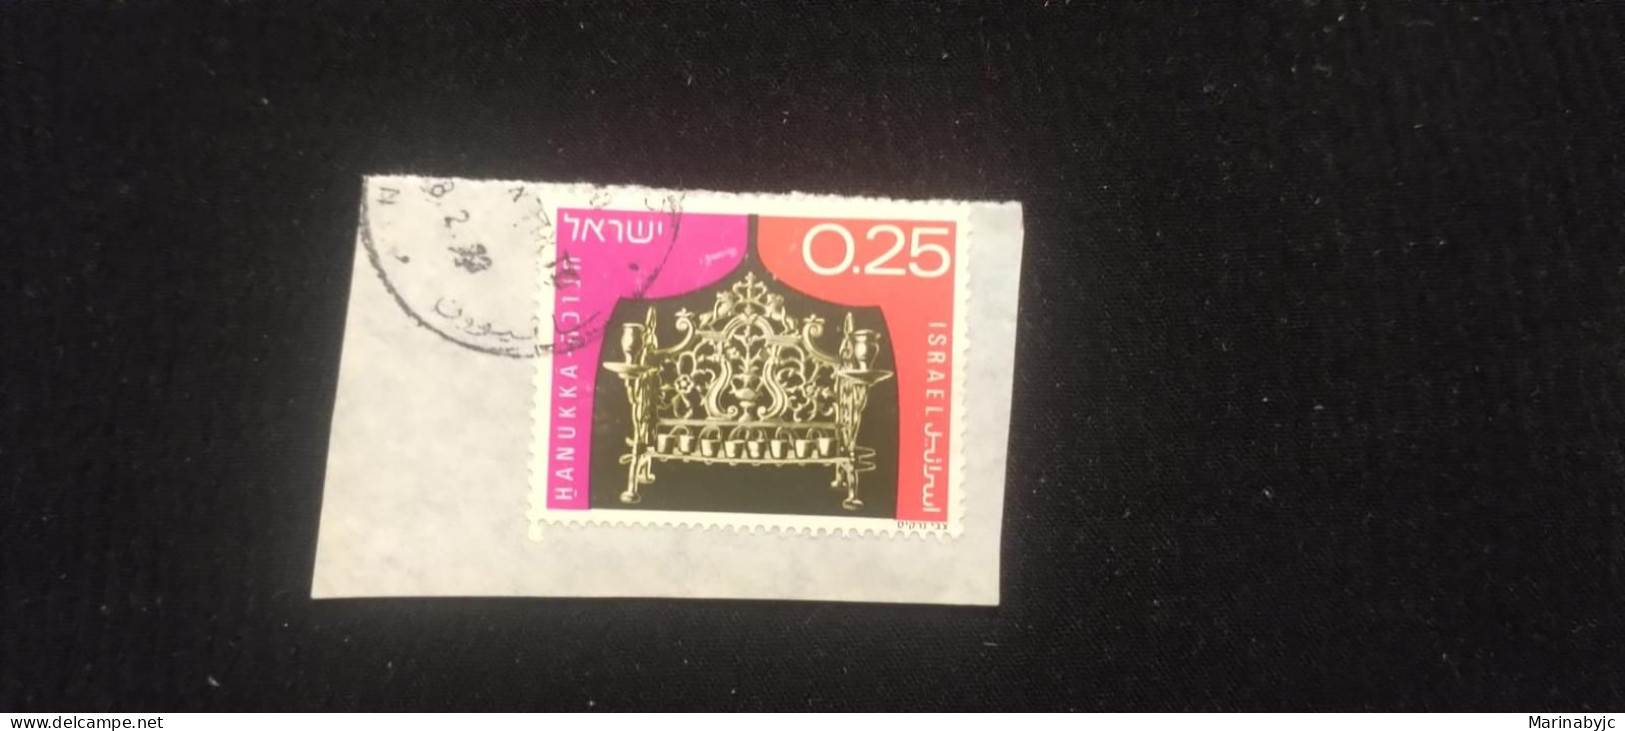 C) 569. 1972. ISRAEL. ENVELOPE SHEET WITH POLAND STAMP, 18TH CENTURY, BRASS. UC. USED. - Altri - Asia